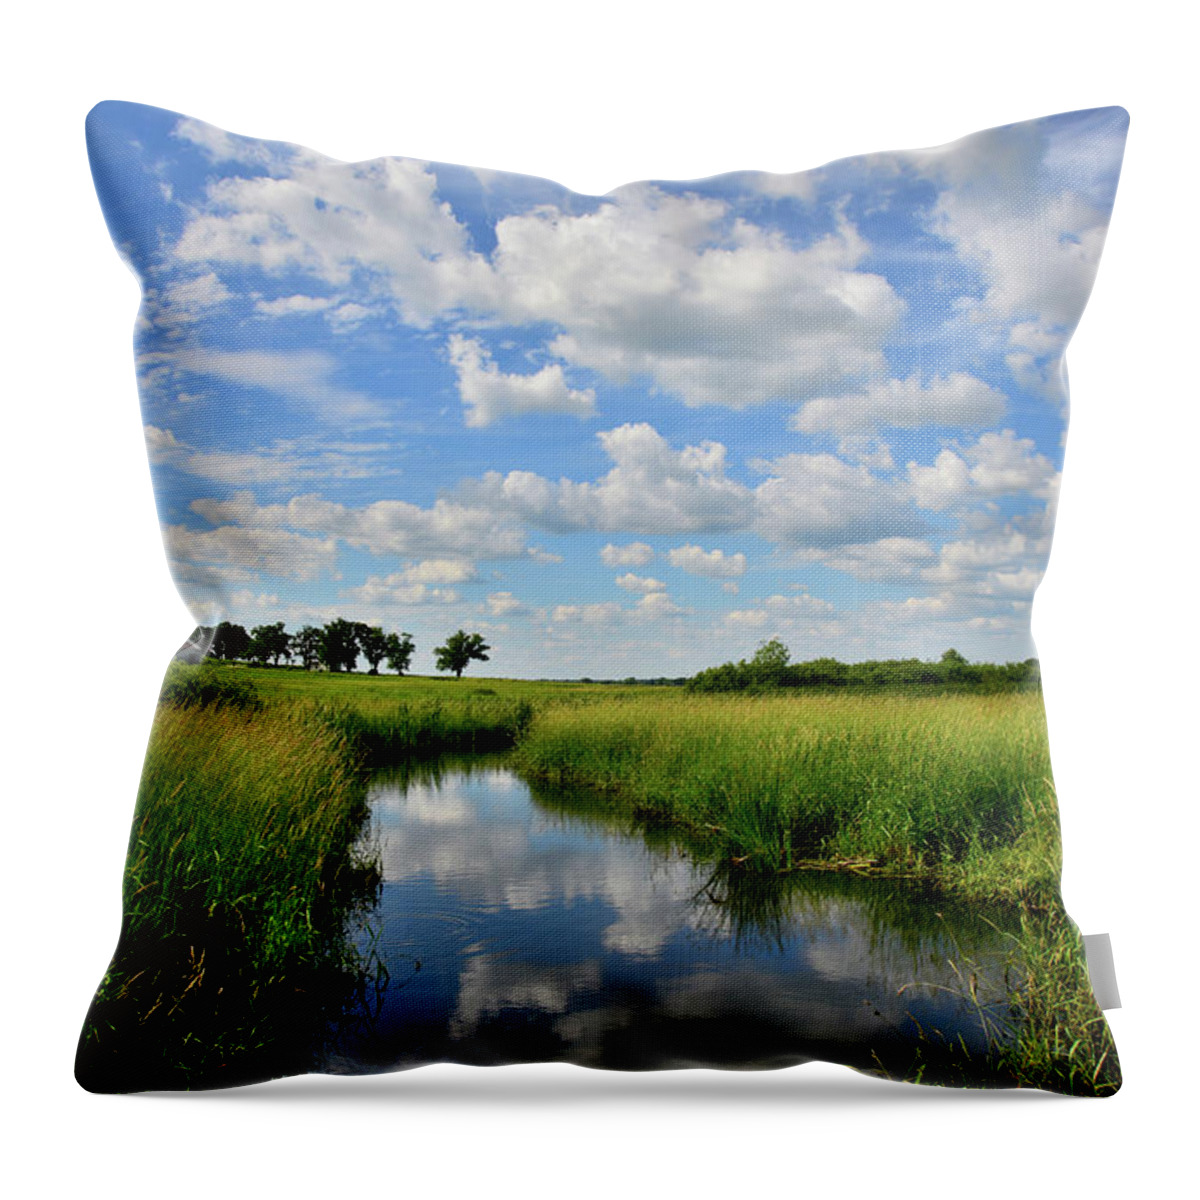 Glacial Park Throw Pillow featuring the photograph Mirror Image of Clouds in Glacial Park Wetland by Ray Mathis